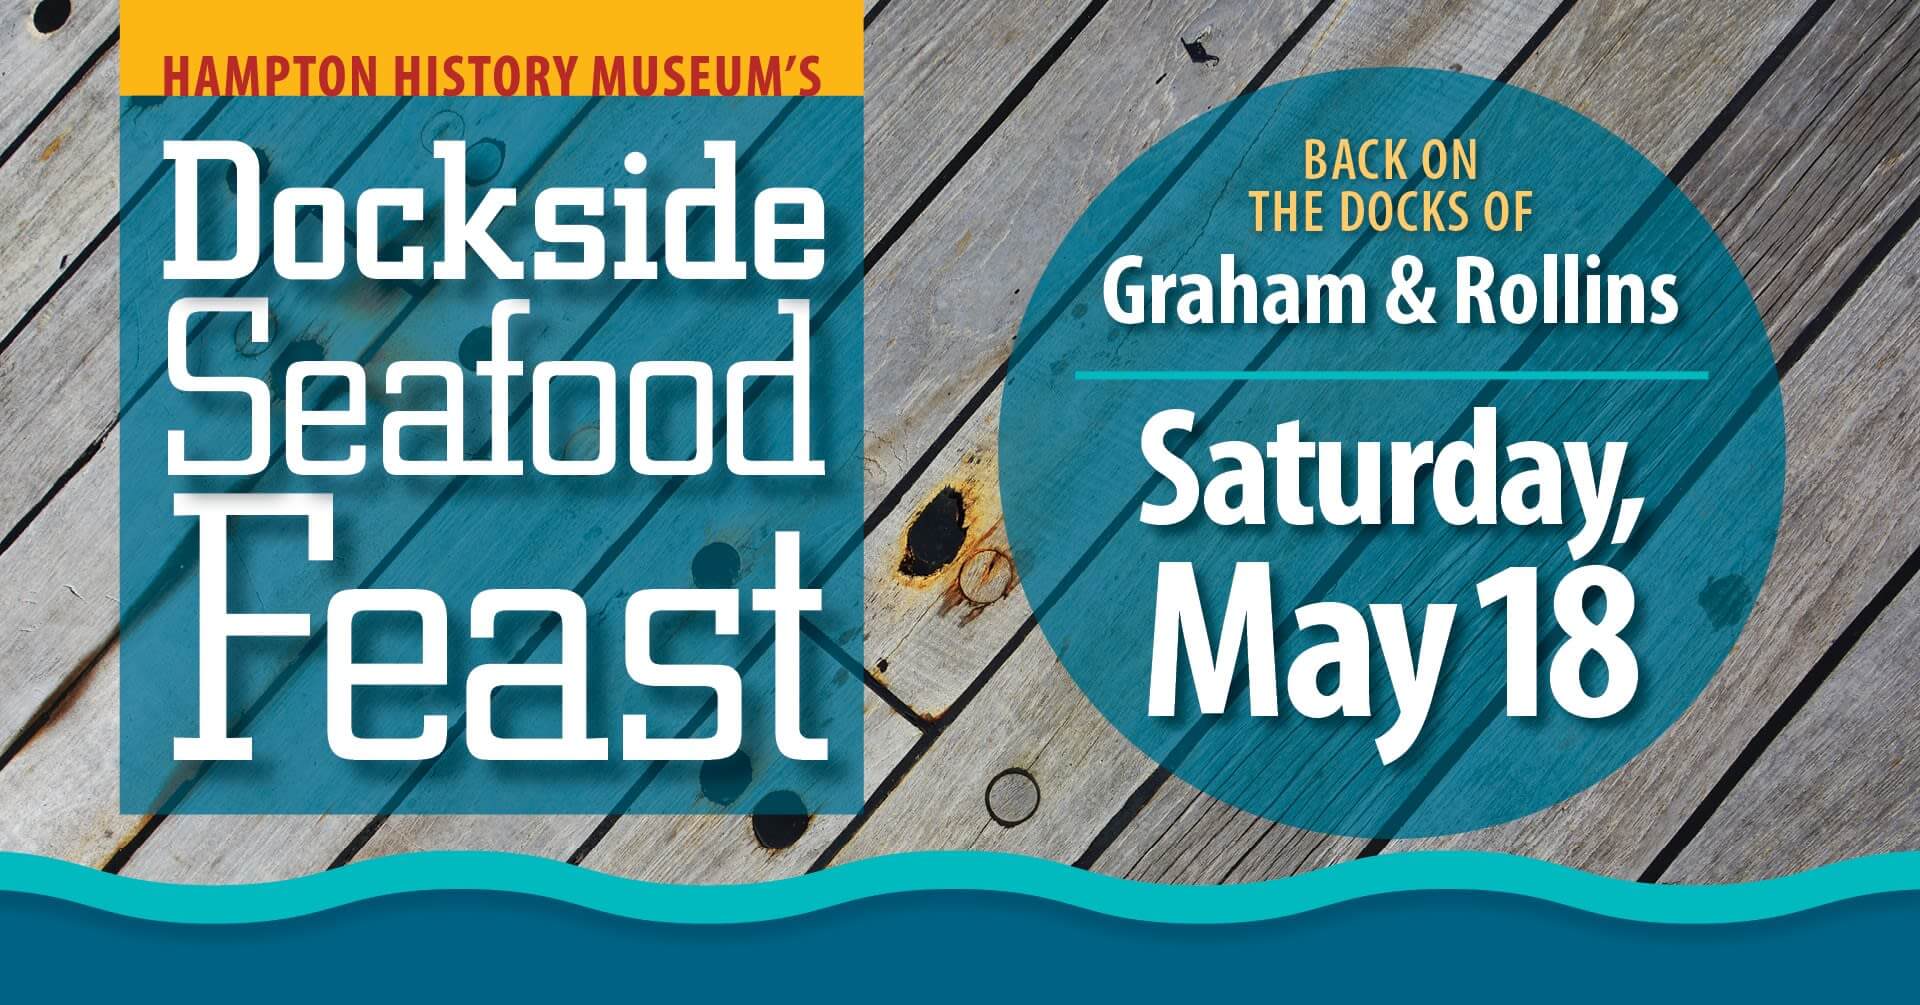 Hampton History Museum's Dockside Seafood Feast on the back docks of Graham & Rollins on Saturday, May 18 (2024)